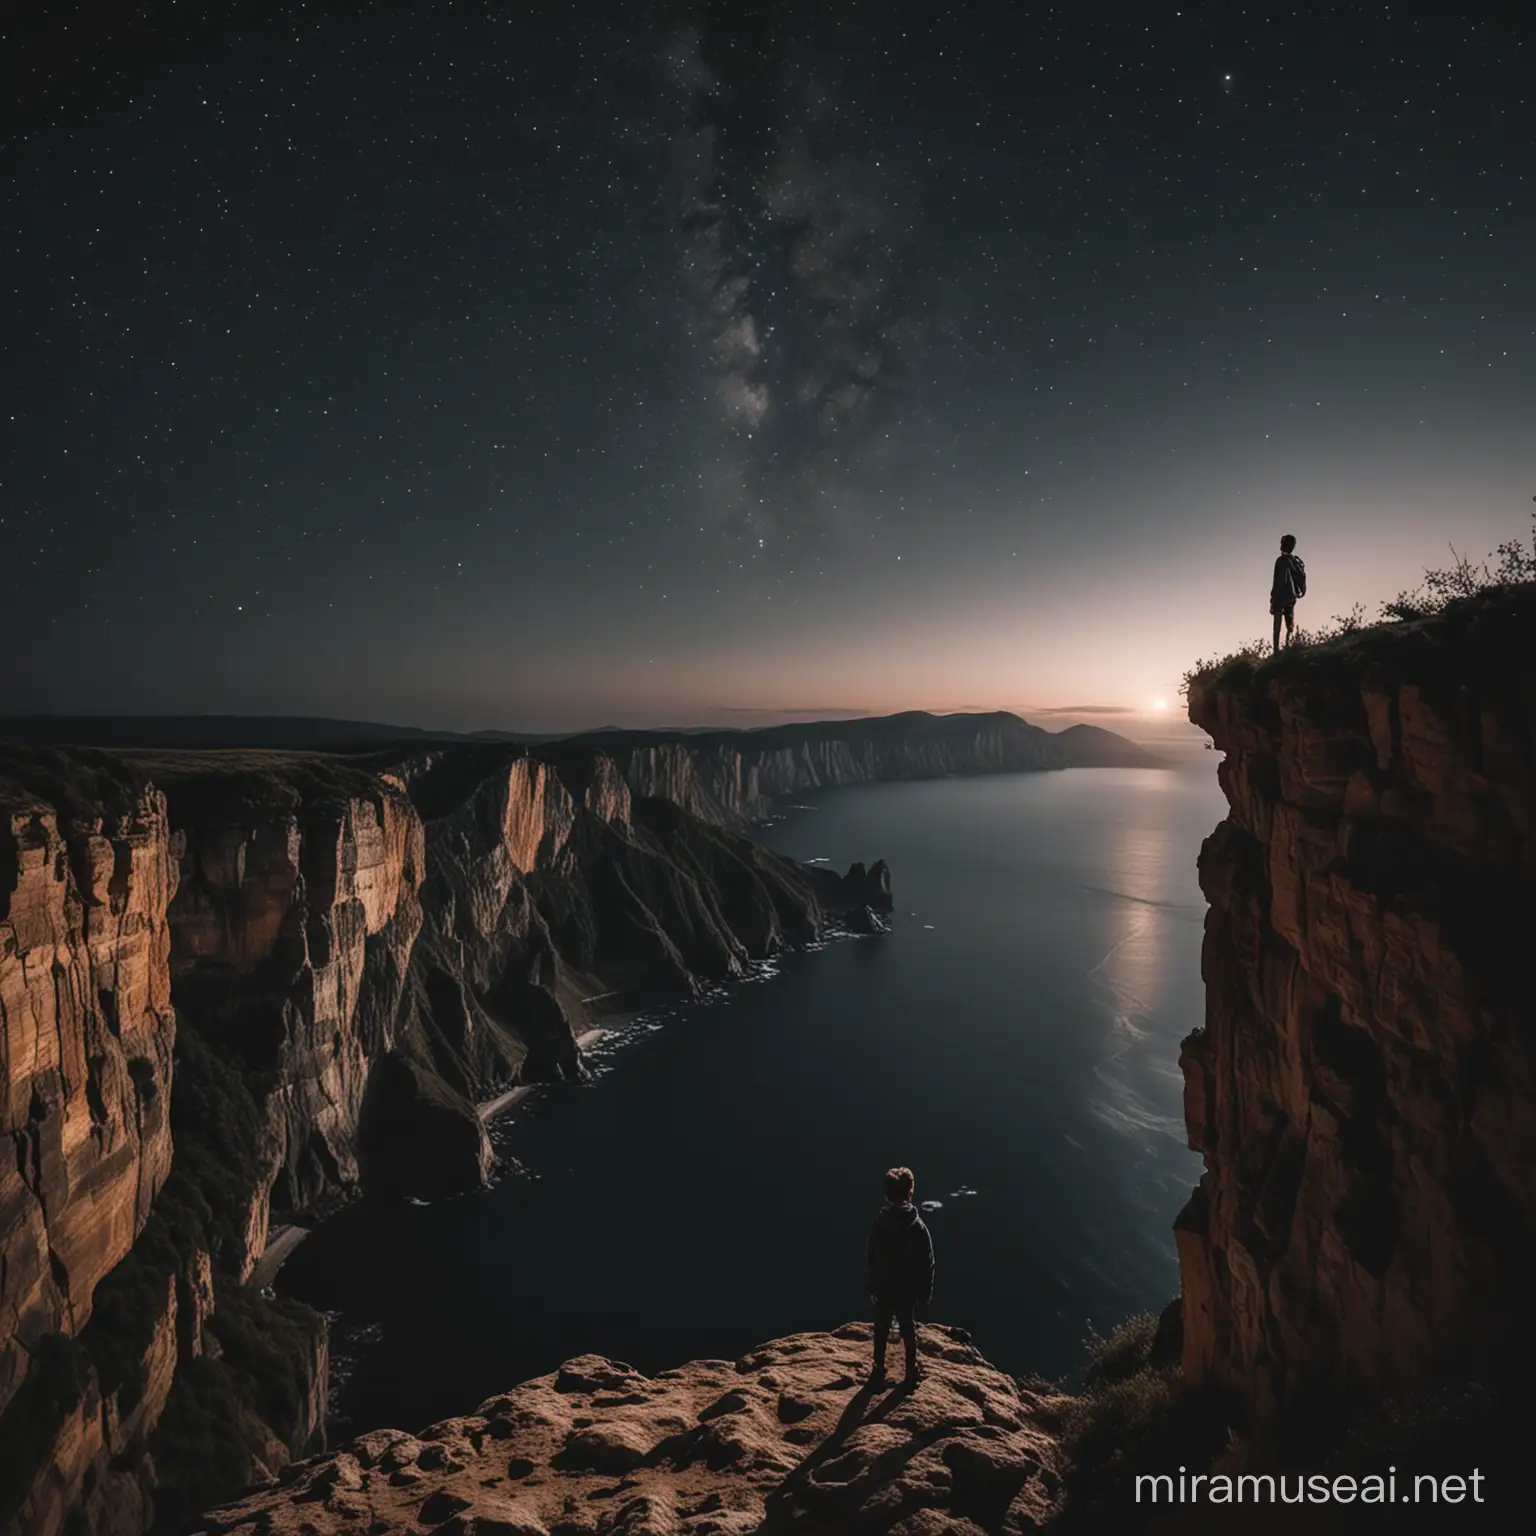 Boy standing at the edge of a cliff looking at a beautiful view at night